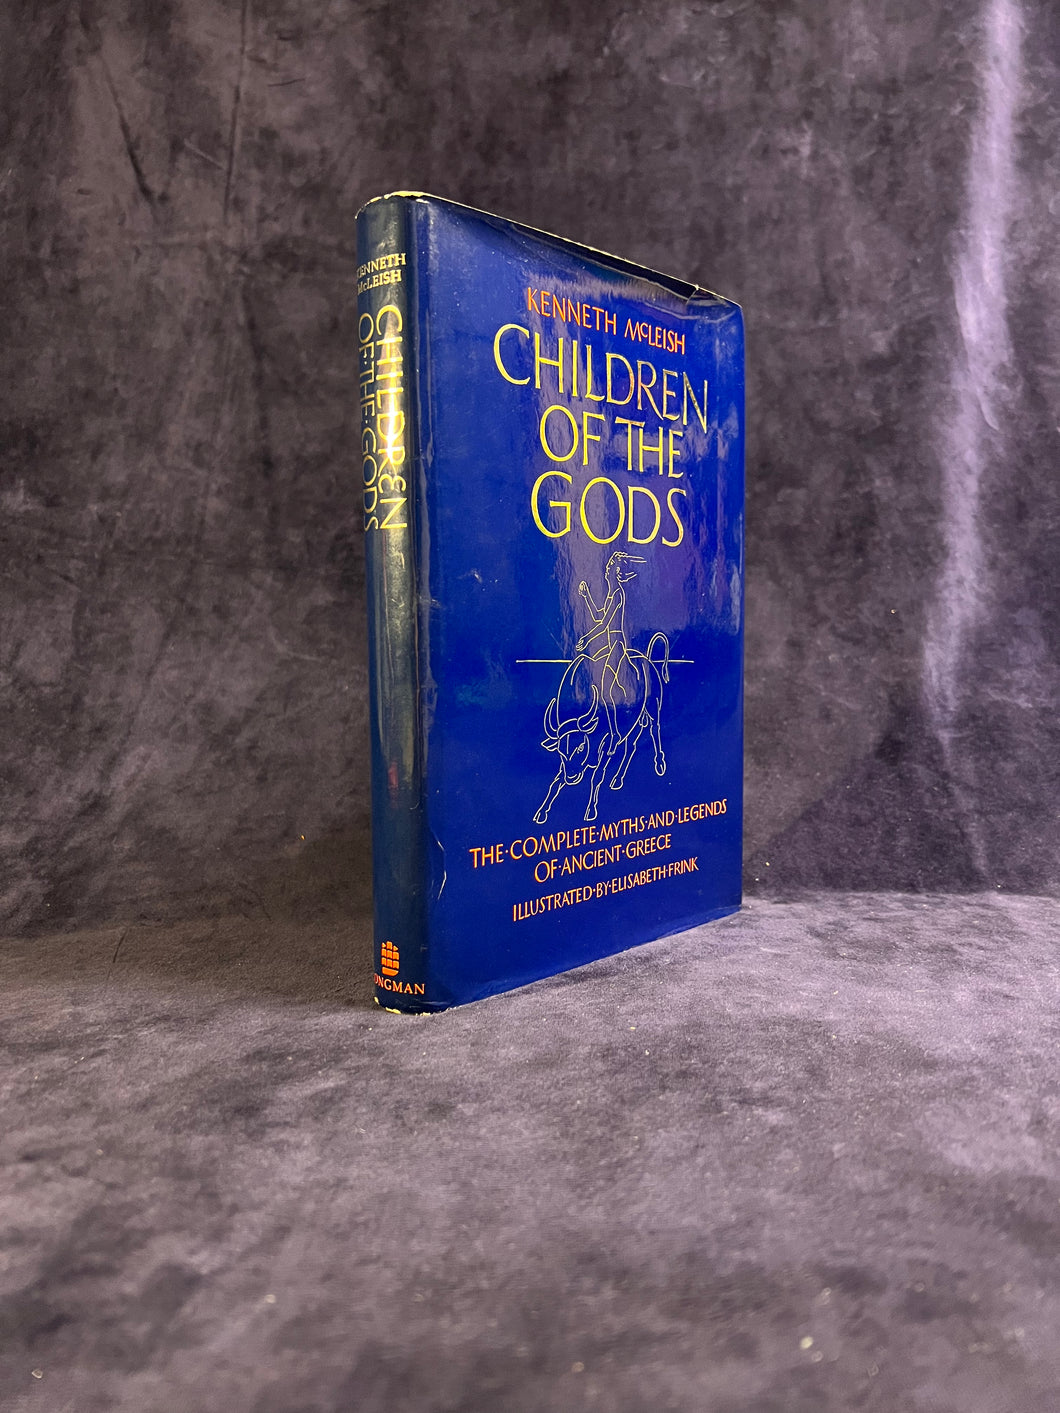 Modern Insight into Ancient Greece: Kenneth McLeish - Children of the Gods (1983)